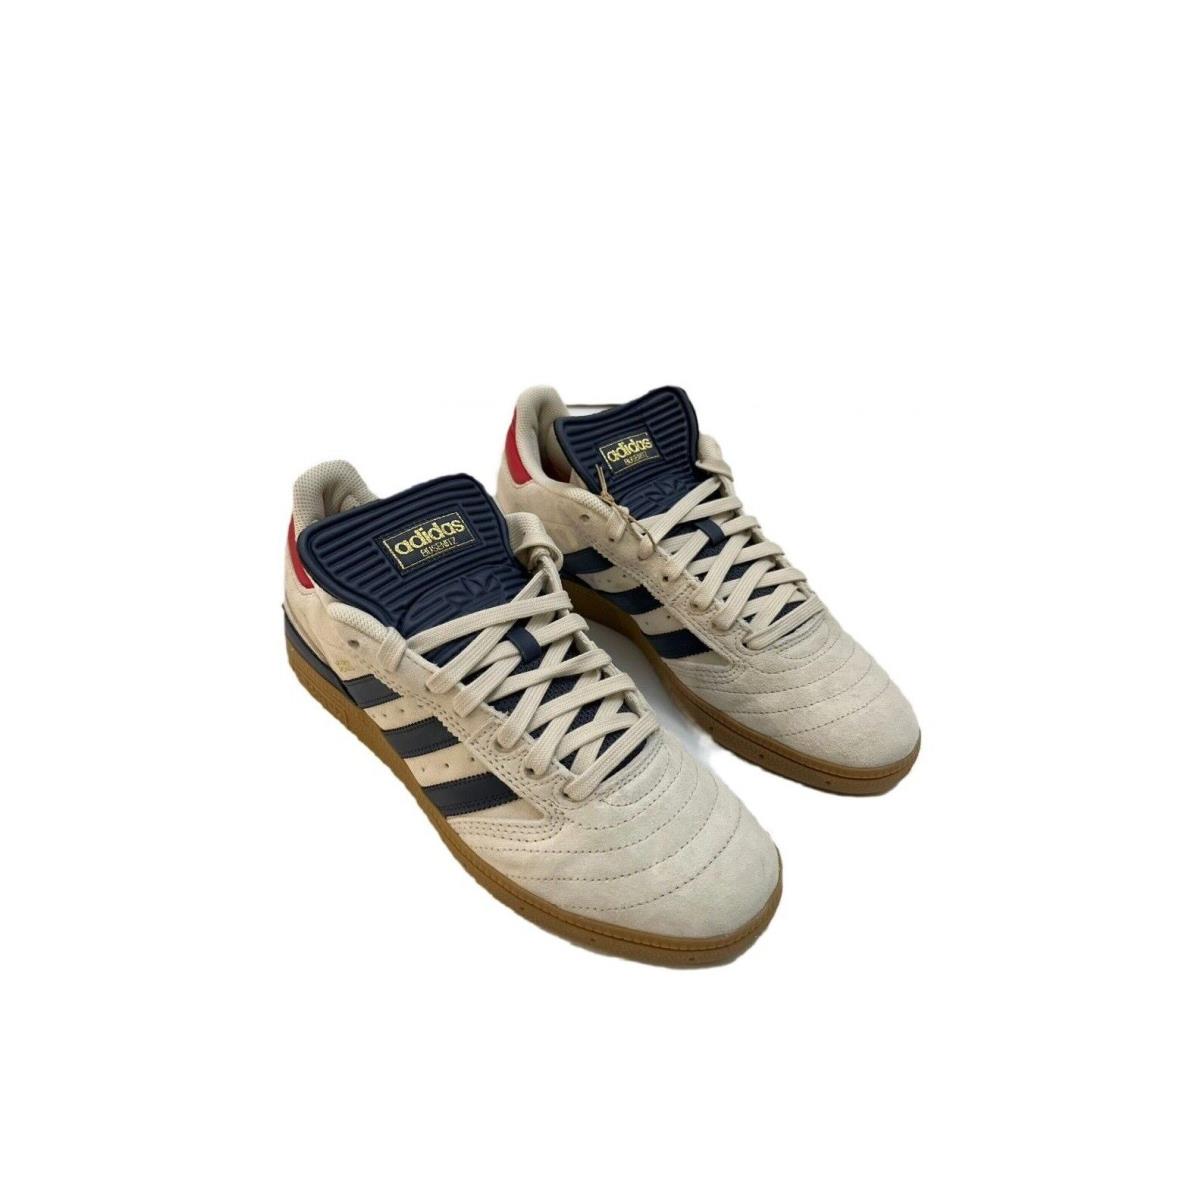 Adidas Men`s Busenitz Activewear/casual Shoes - Bliss/Shadow Navy/Scarlet